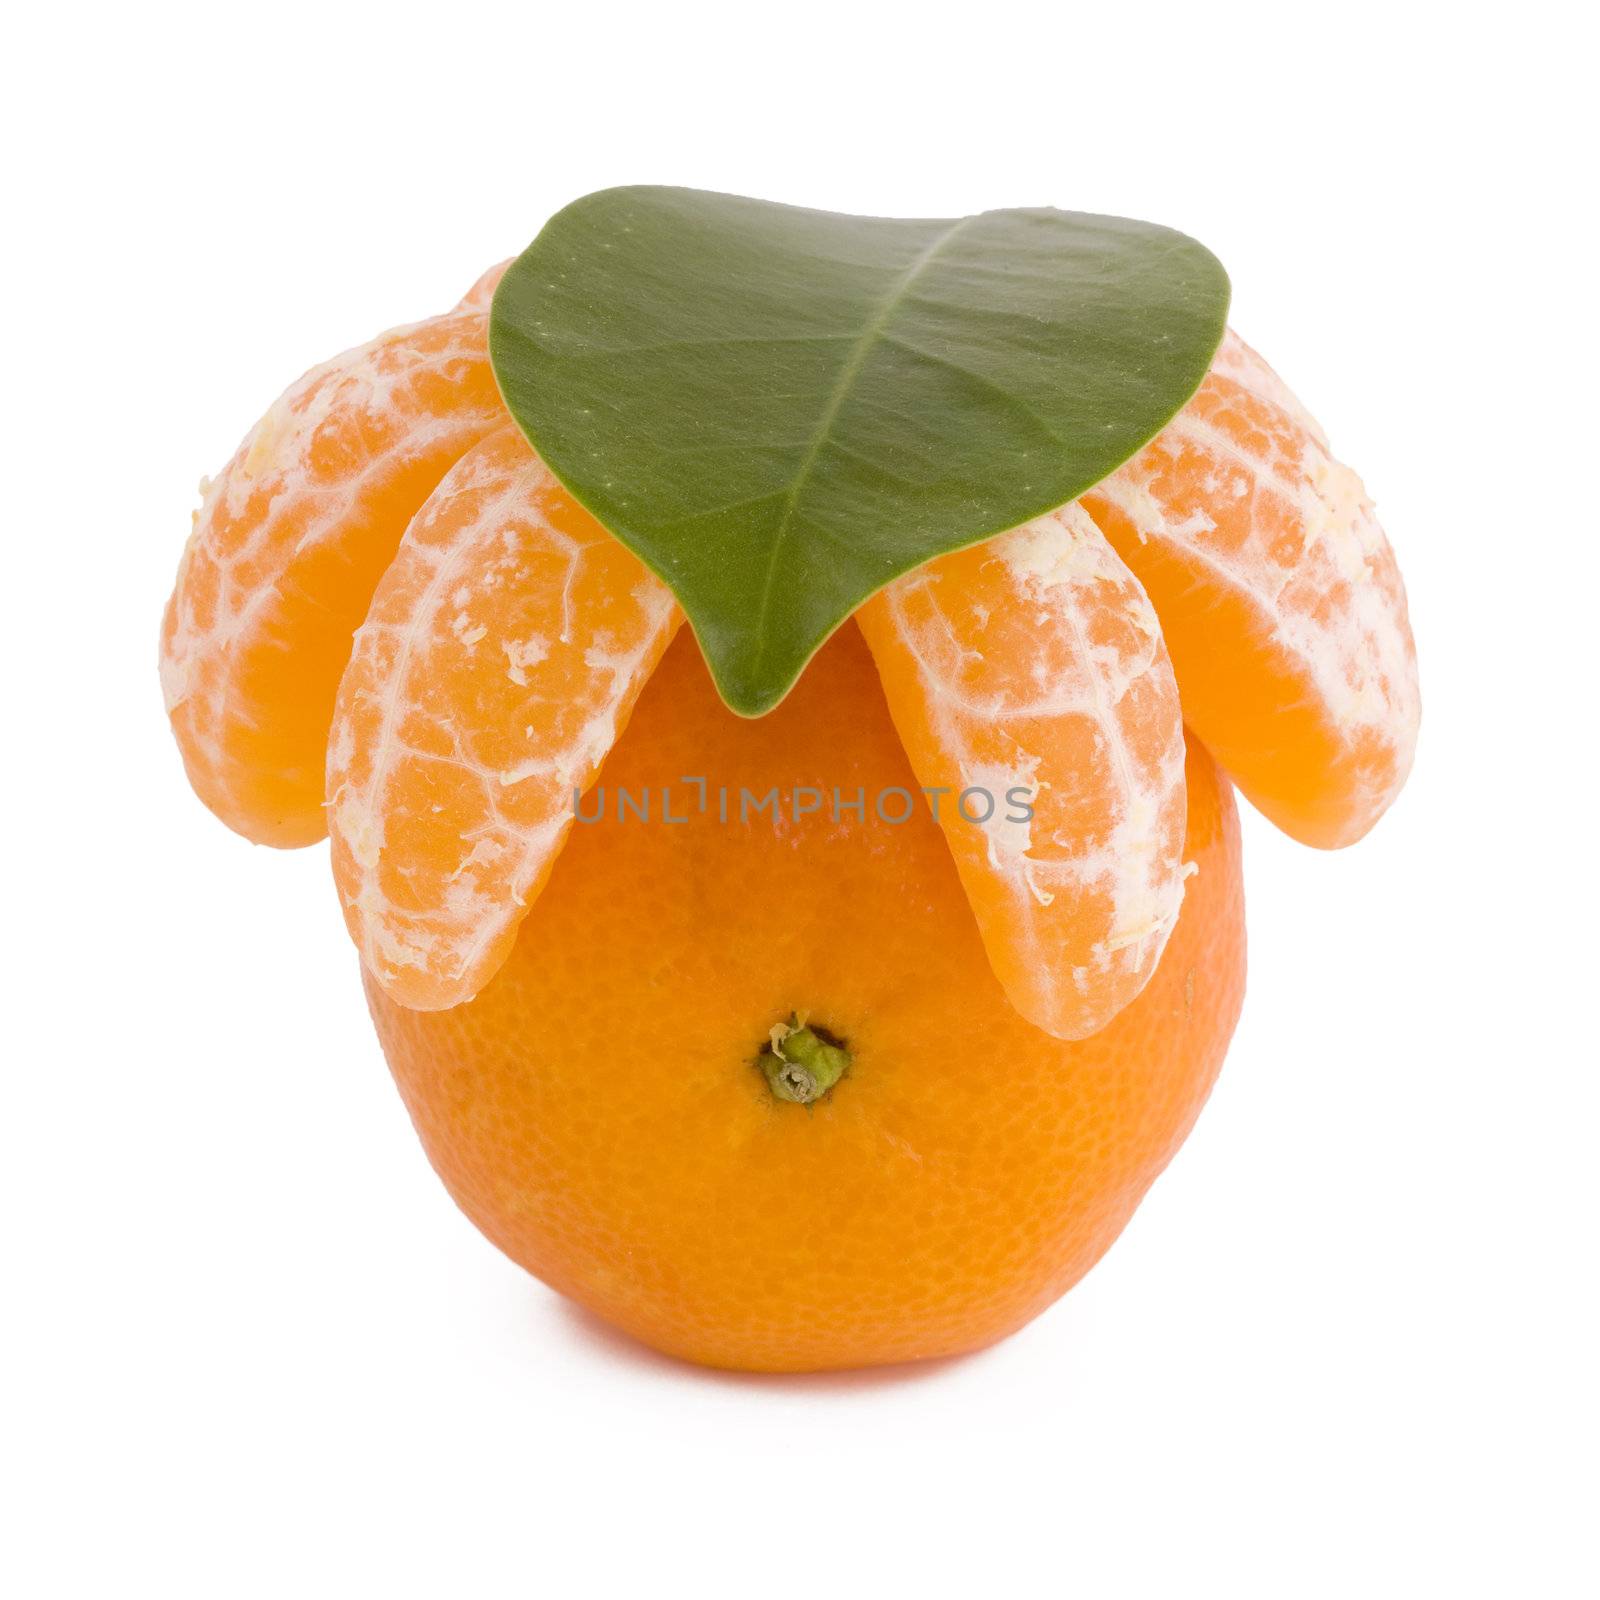 Fresh juicy tangerine with leaf on top, isolated on white background